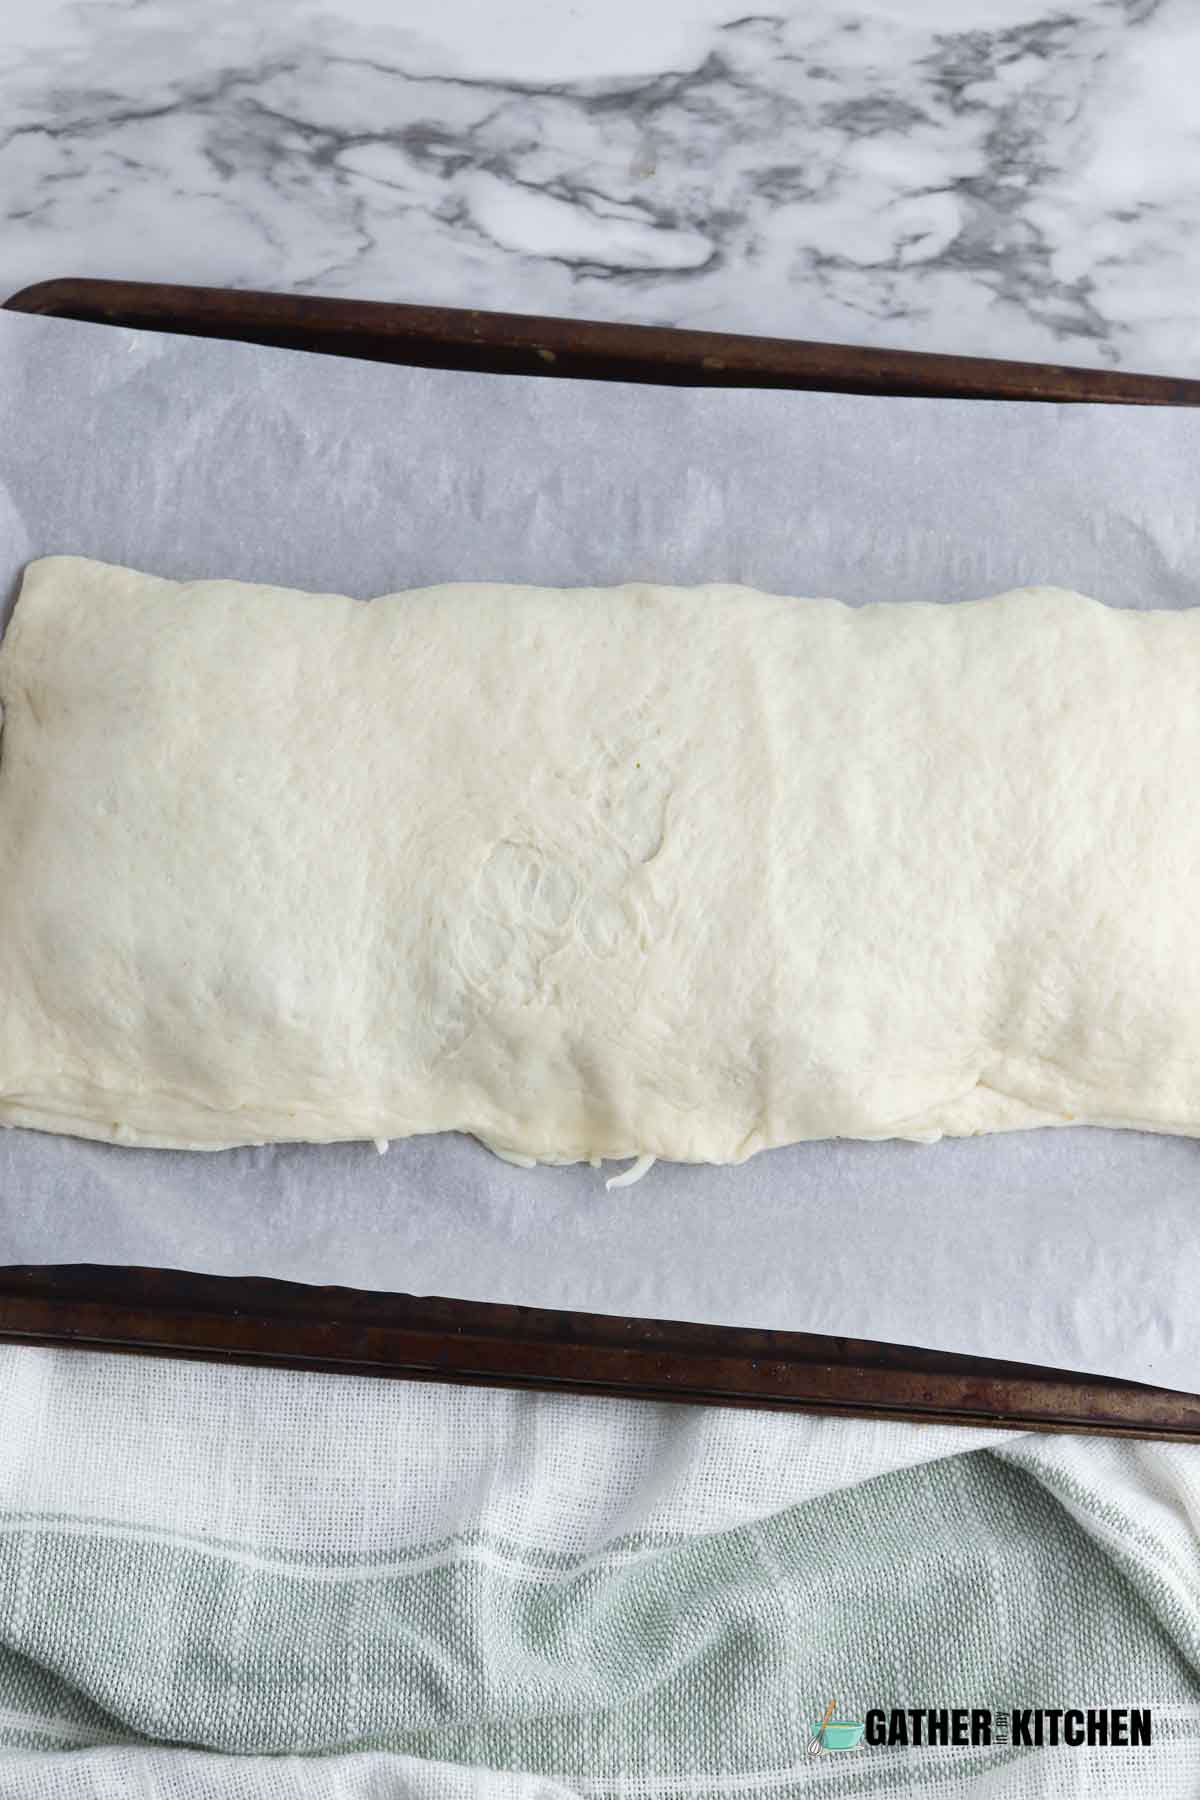 Dough folded over and sealed.